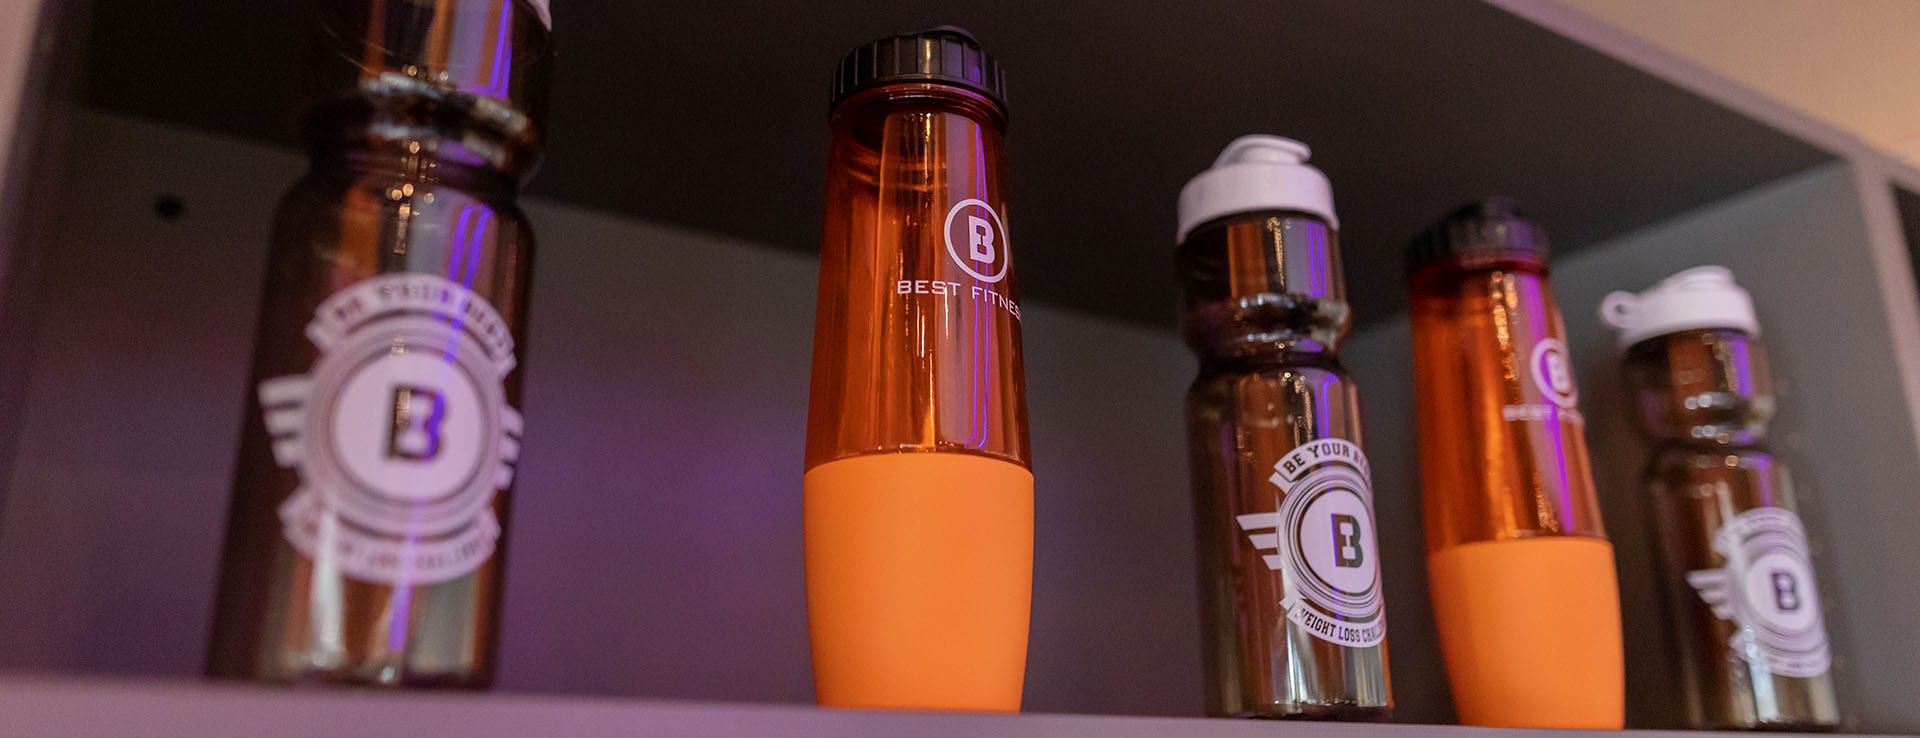 best fitness water bottles at pro shop